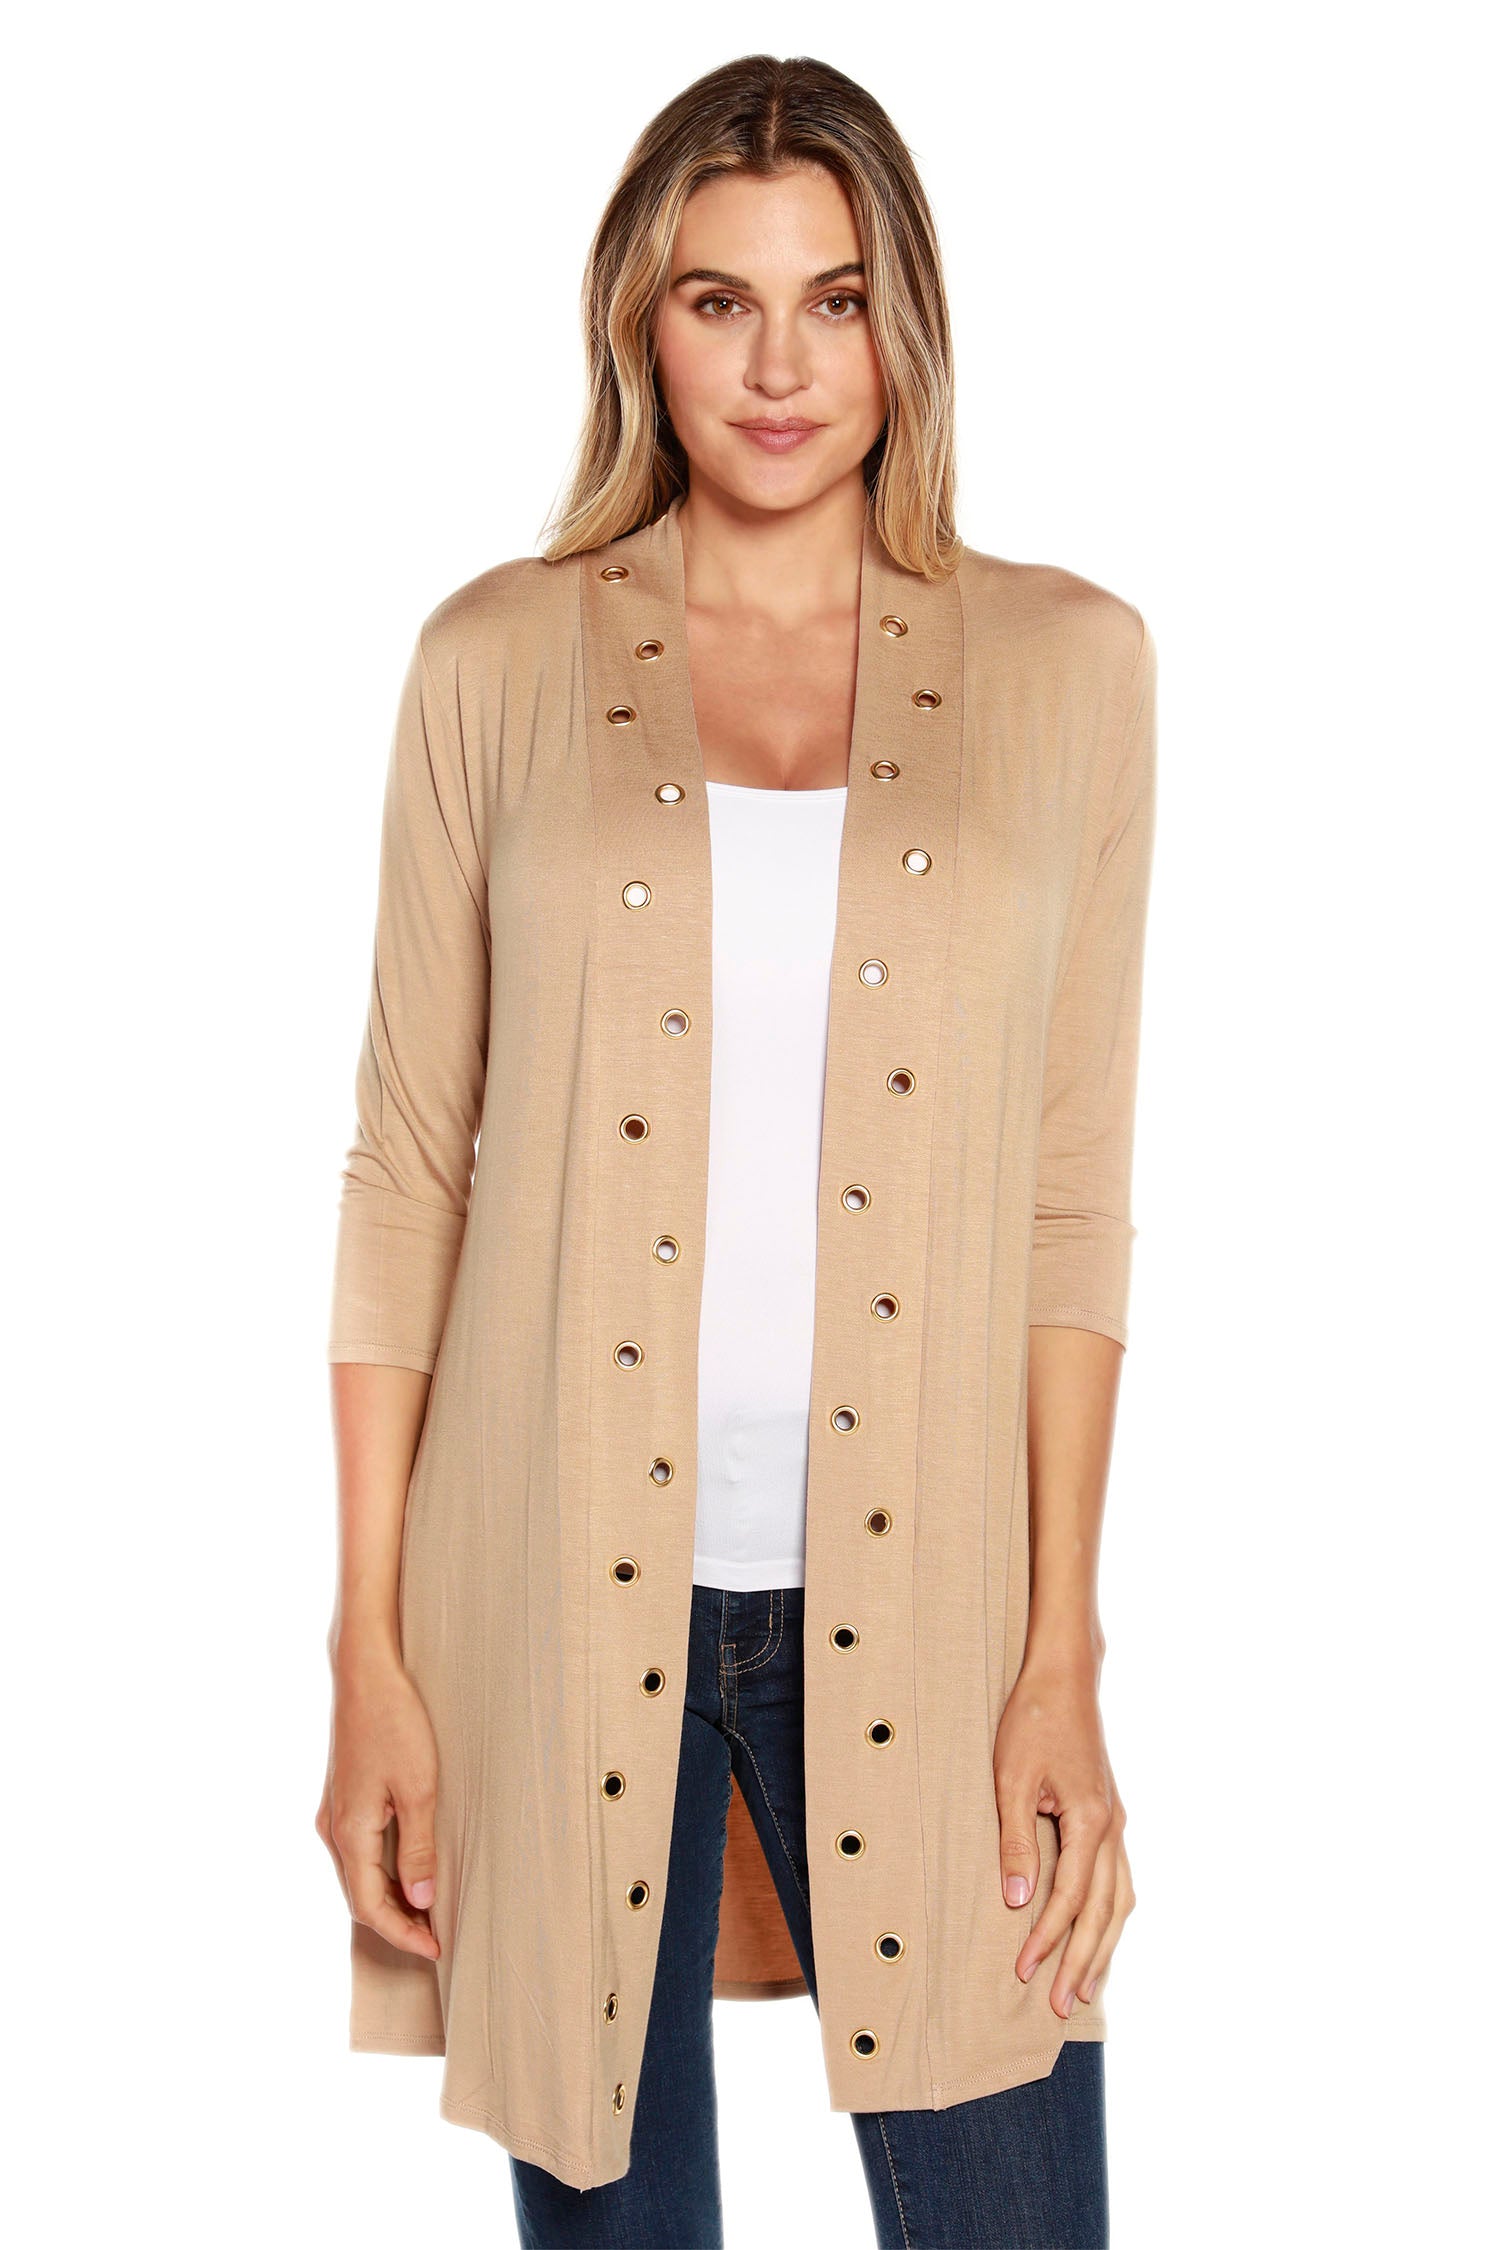 Women's 3/4 Sleeve Mid-Thigh Jersey Cardigan with Grommet Trim